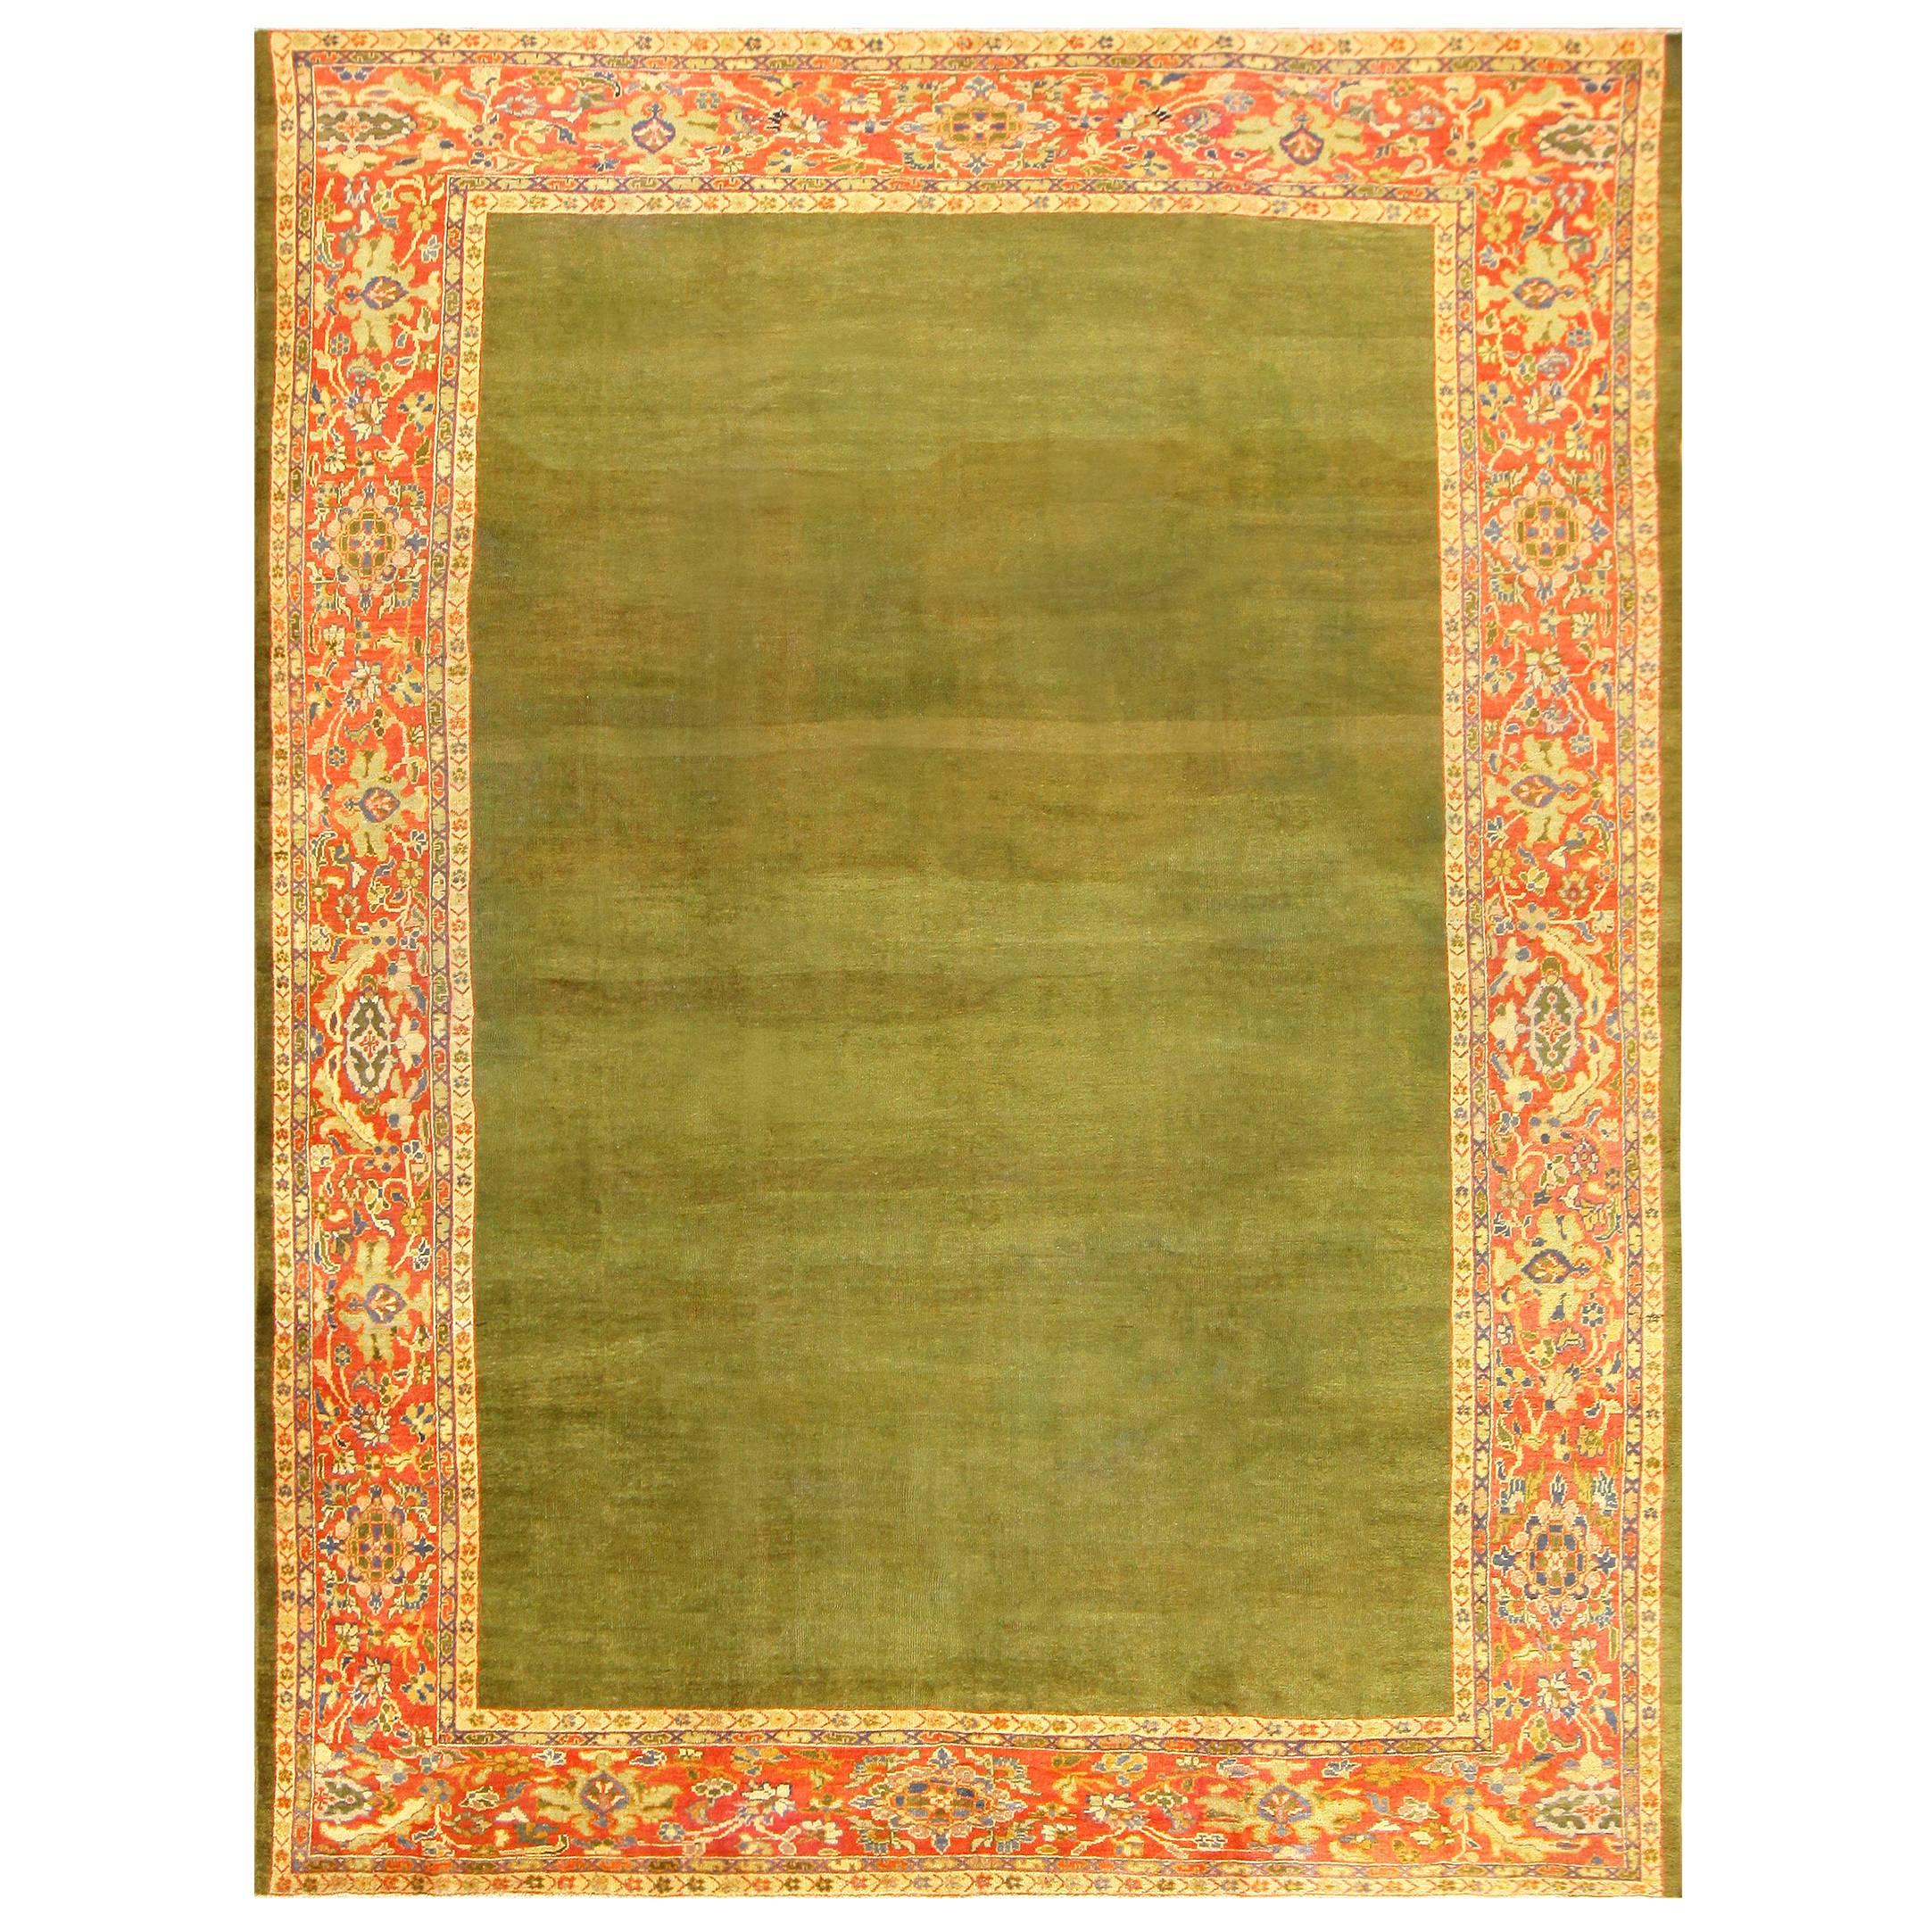 Antique Green Background Persian Sultanabad Rug. Size: 11 ft 6 in x 15 ft 6 in